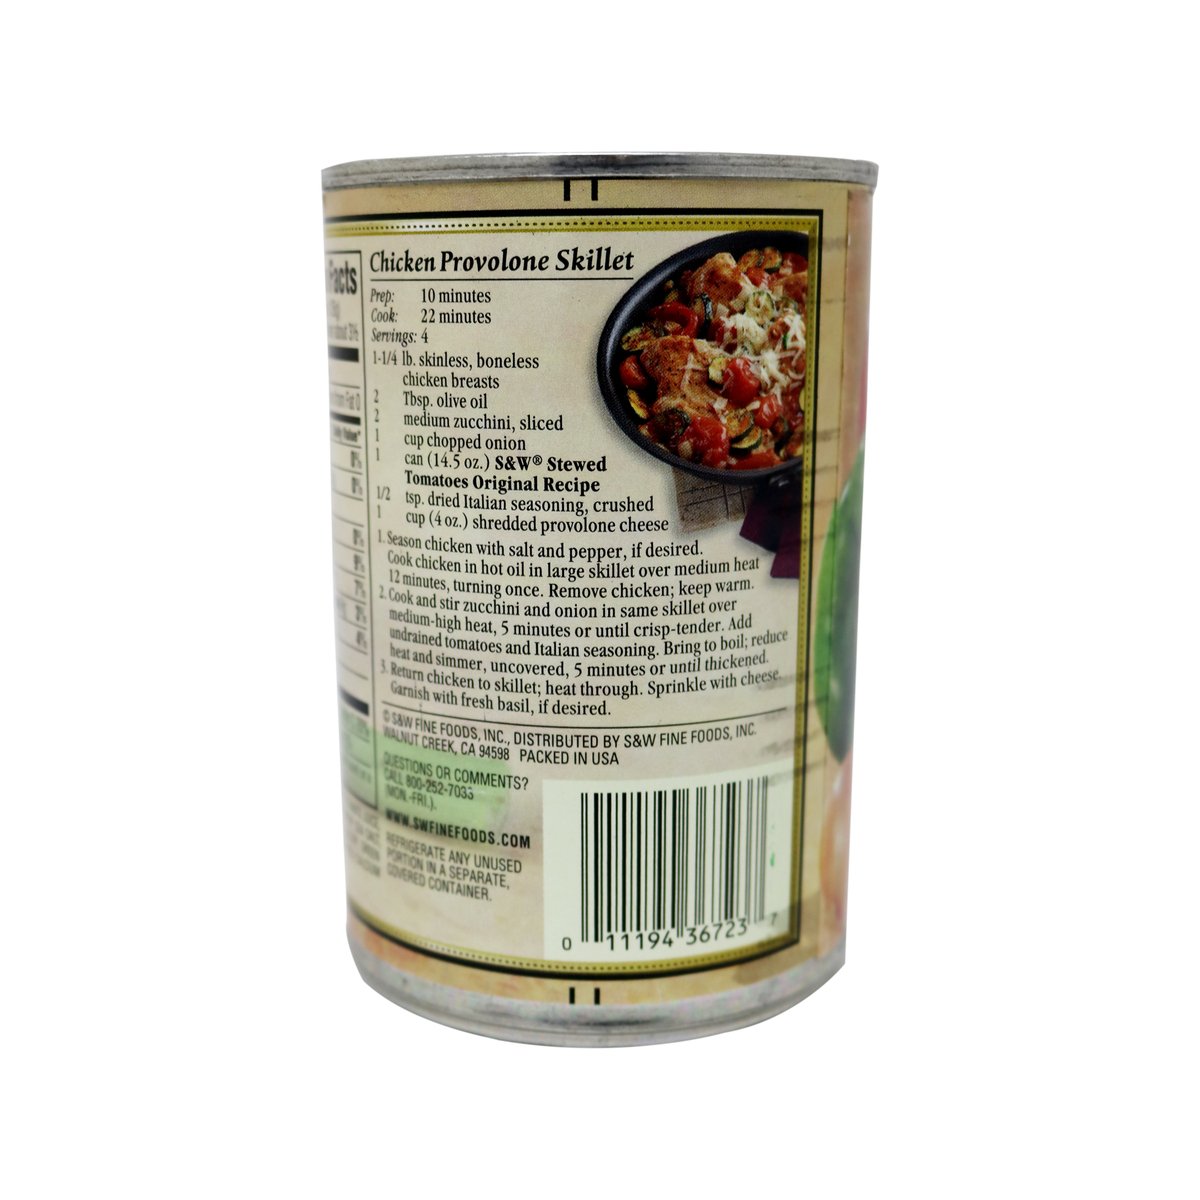 S&W Stewed Tomatoes 411g